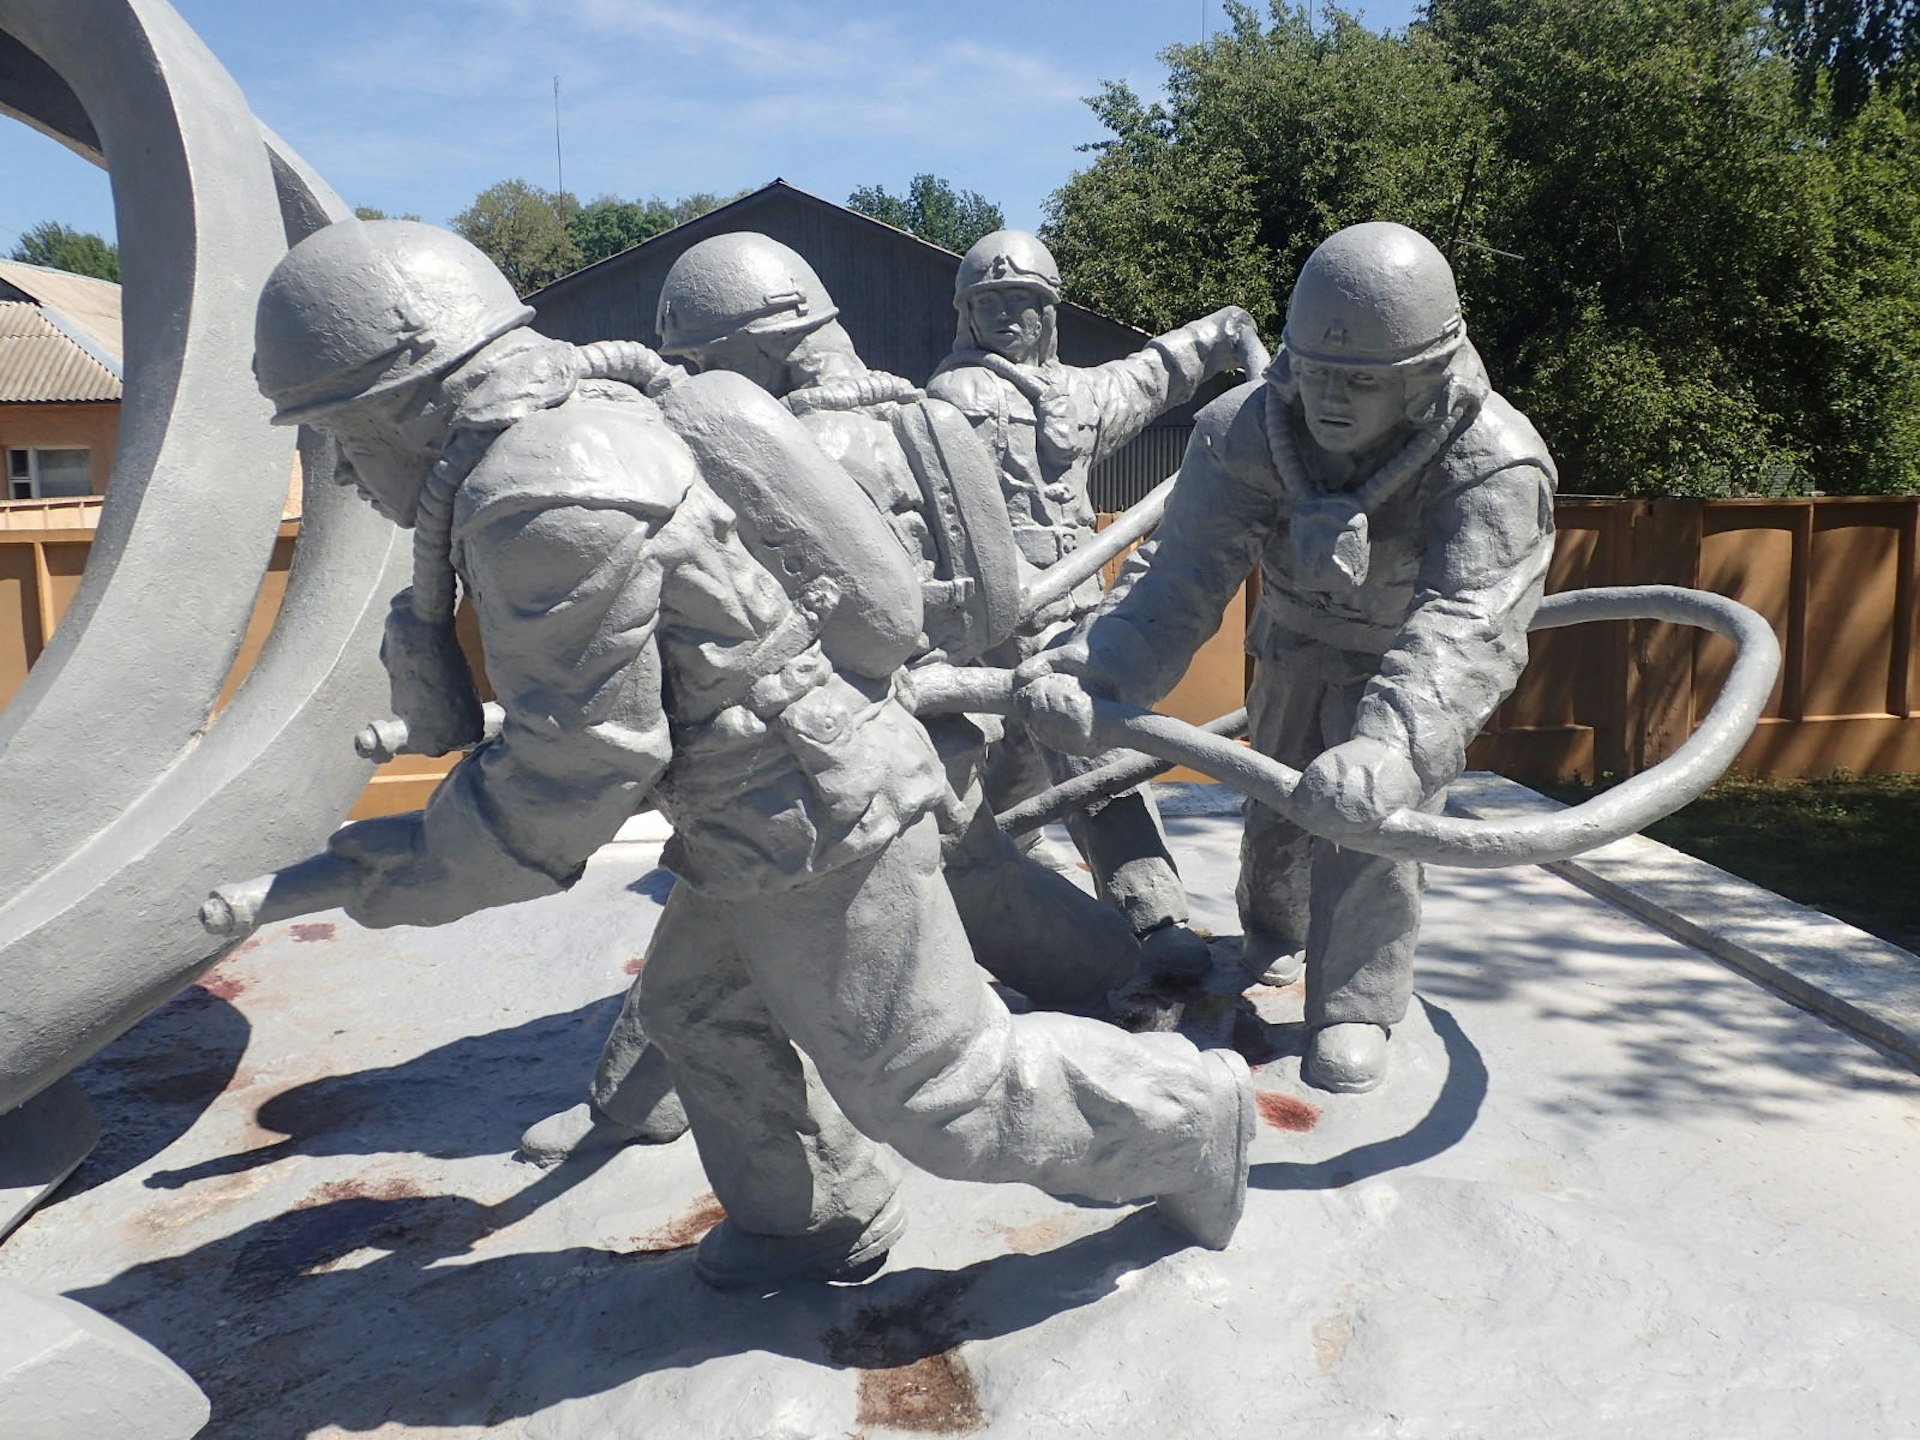 Monument to emergency workers outside Chernobyl, with concrete sculptures of firefighters with hoses tackling the explosion.